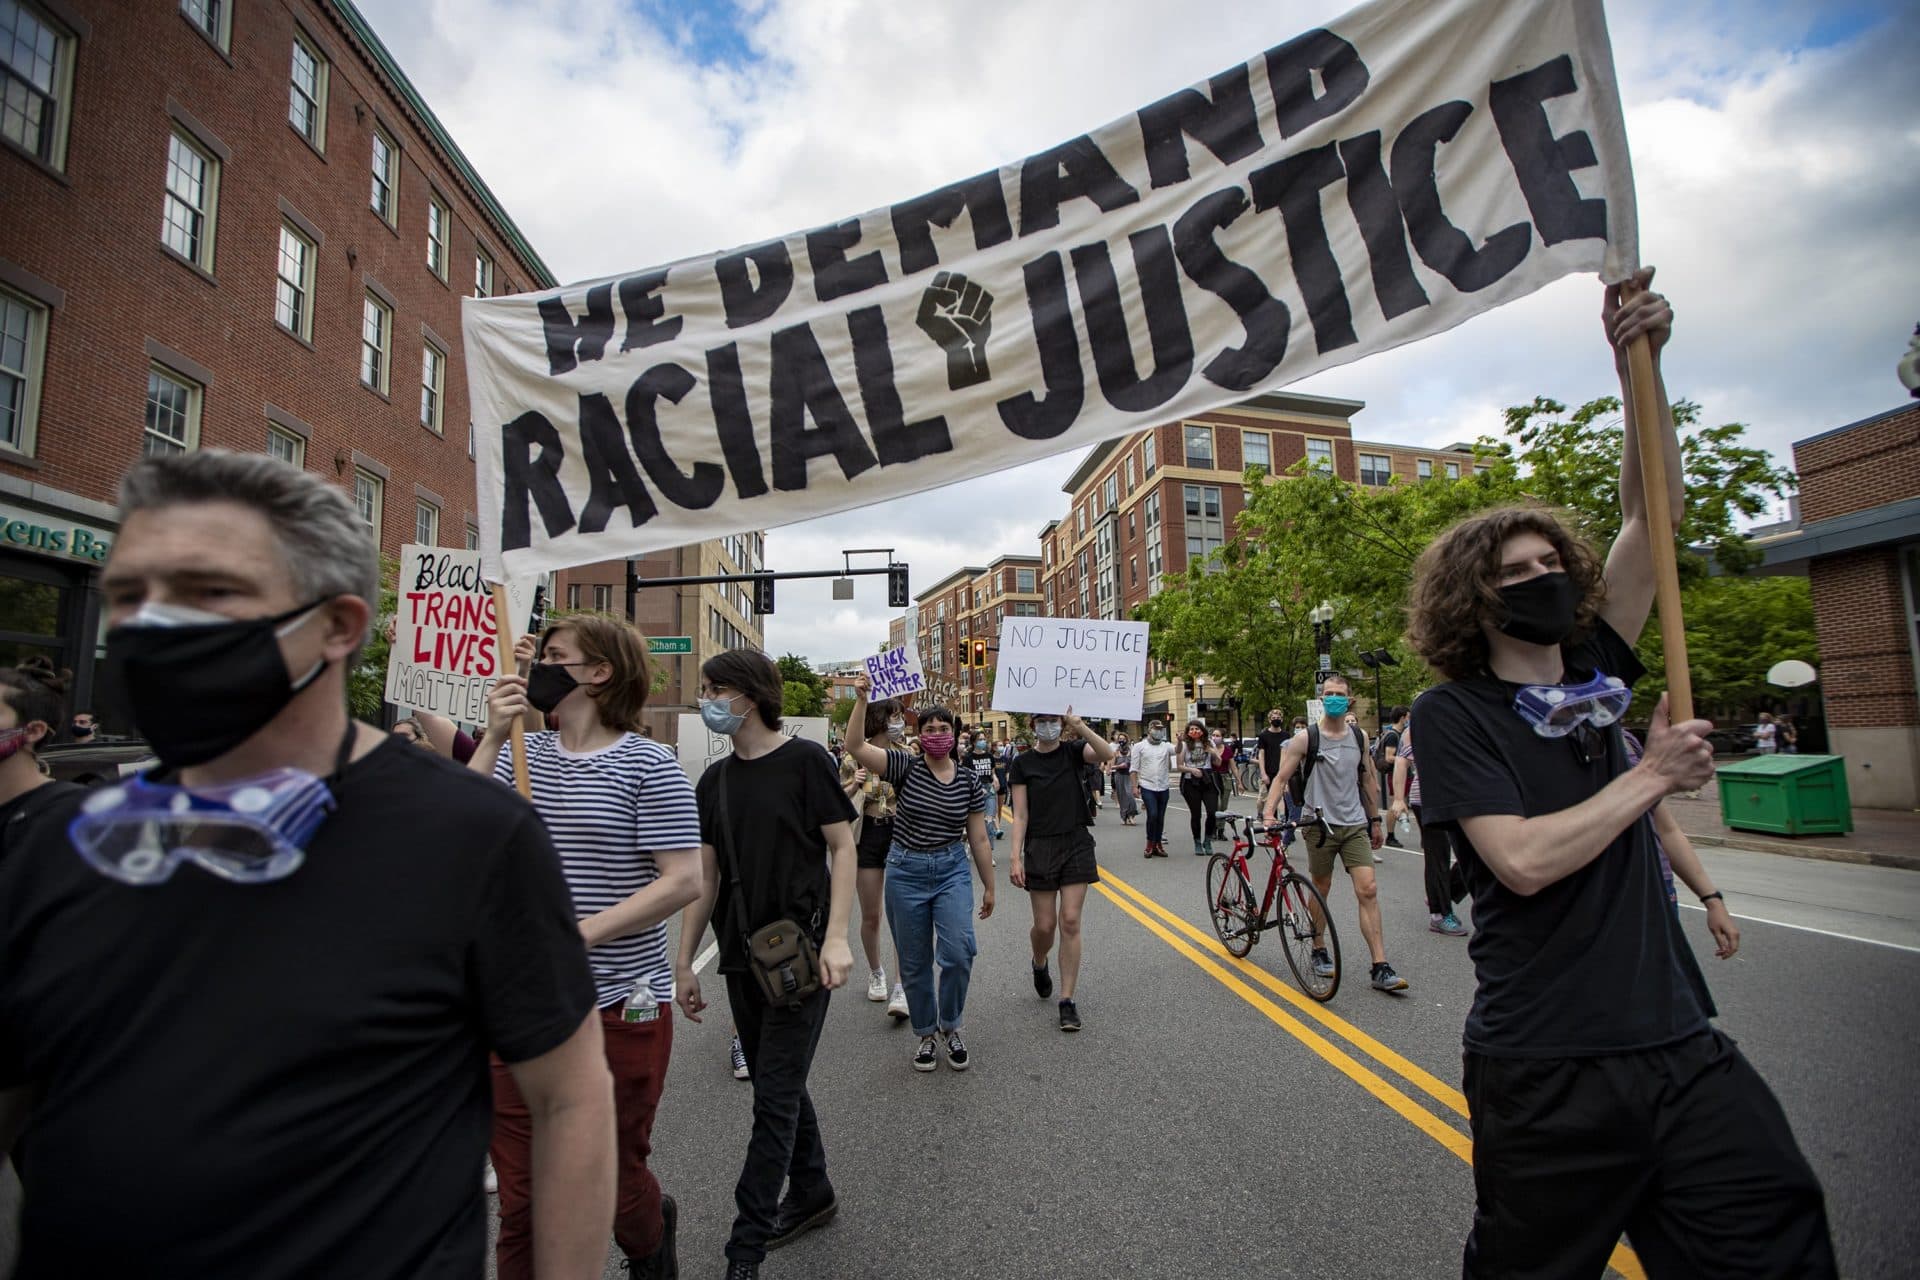 Protesters hold a banner as they march down Washington Street in Boston. (Jesse Costa/WBUR)